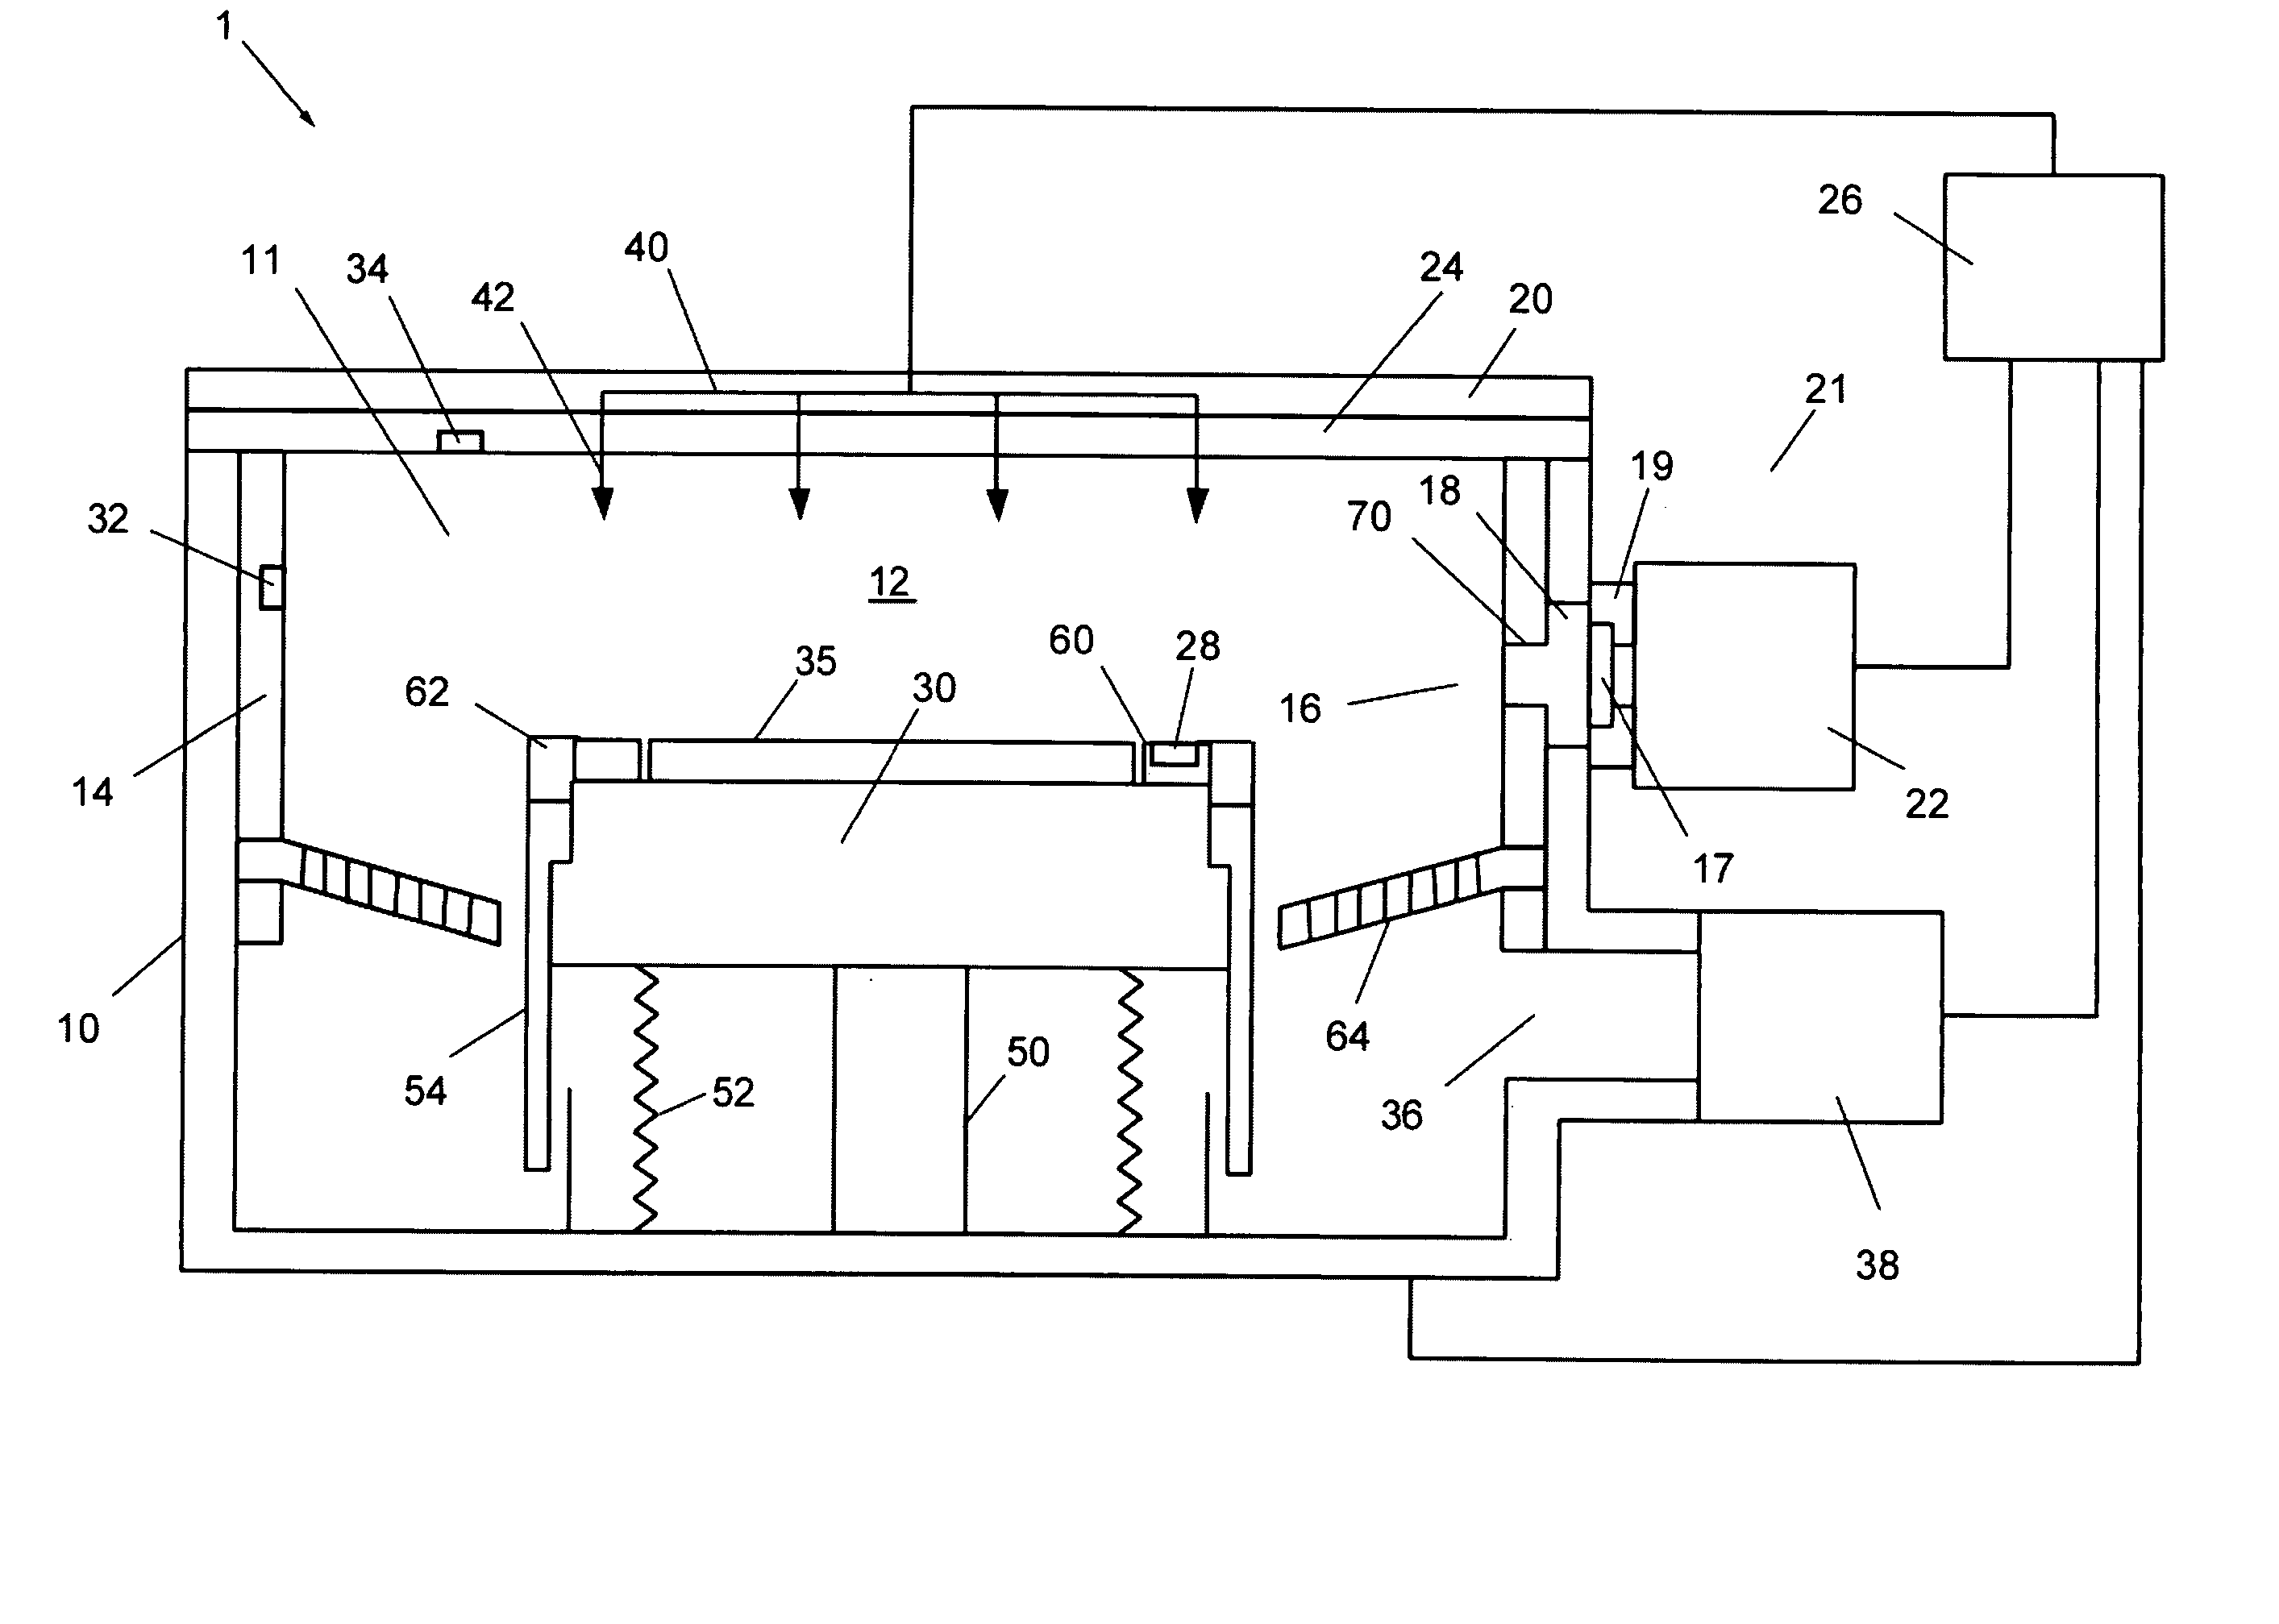 Sensing component used to monitor material buildup and material erosion of consumables by optical emission